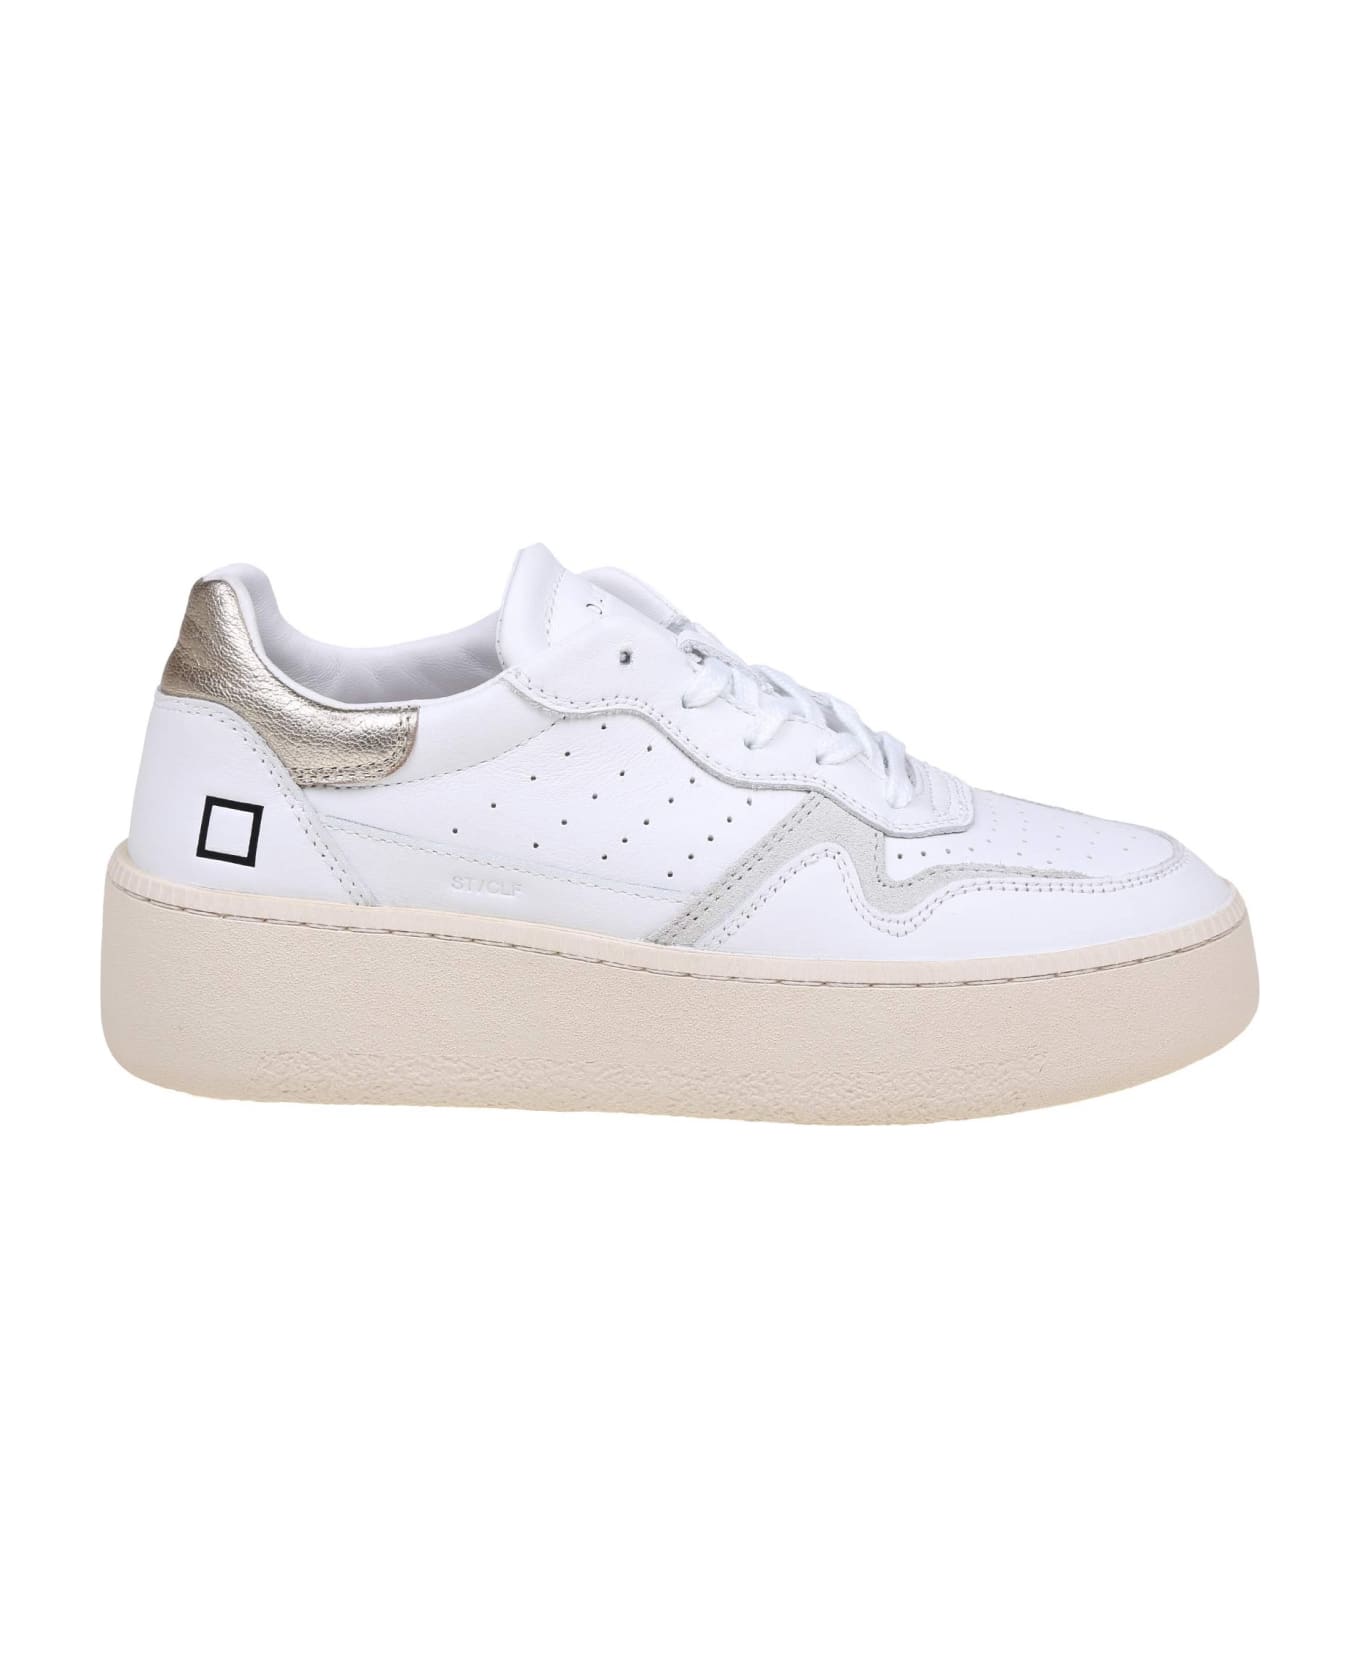 D.A.T.E. Step Sneakers In White Leather - platinum